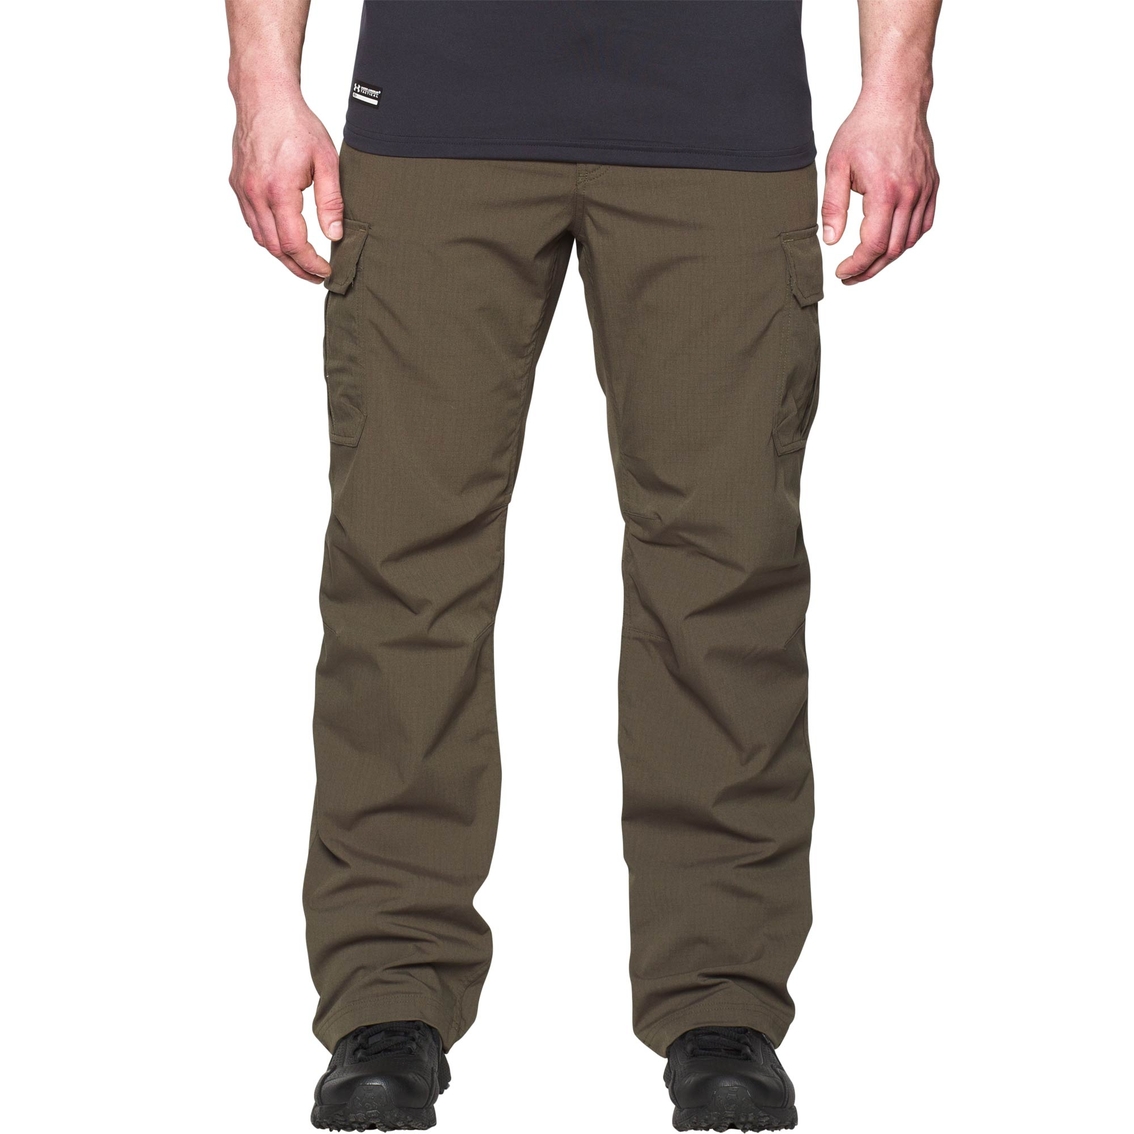 Under Armour Storm Tactical Patrol Pants, Patches, Clothing & Accessories